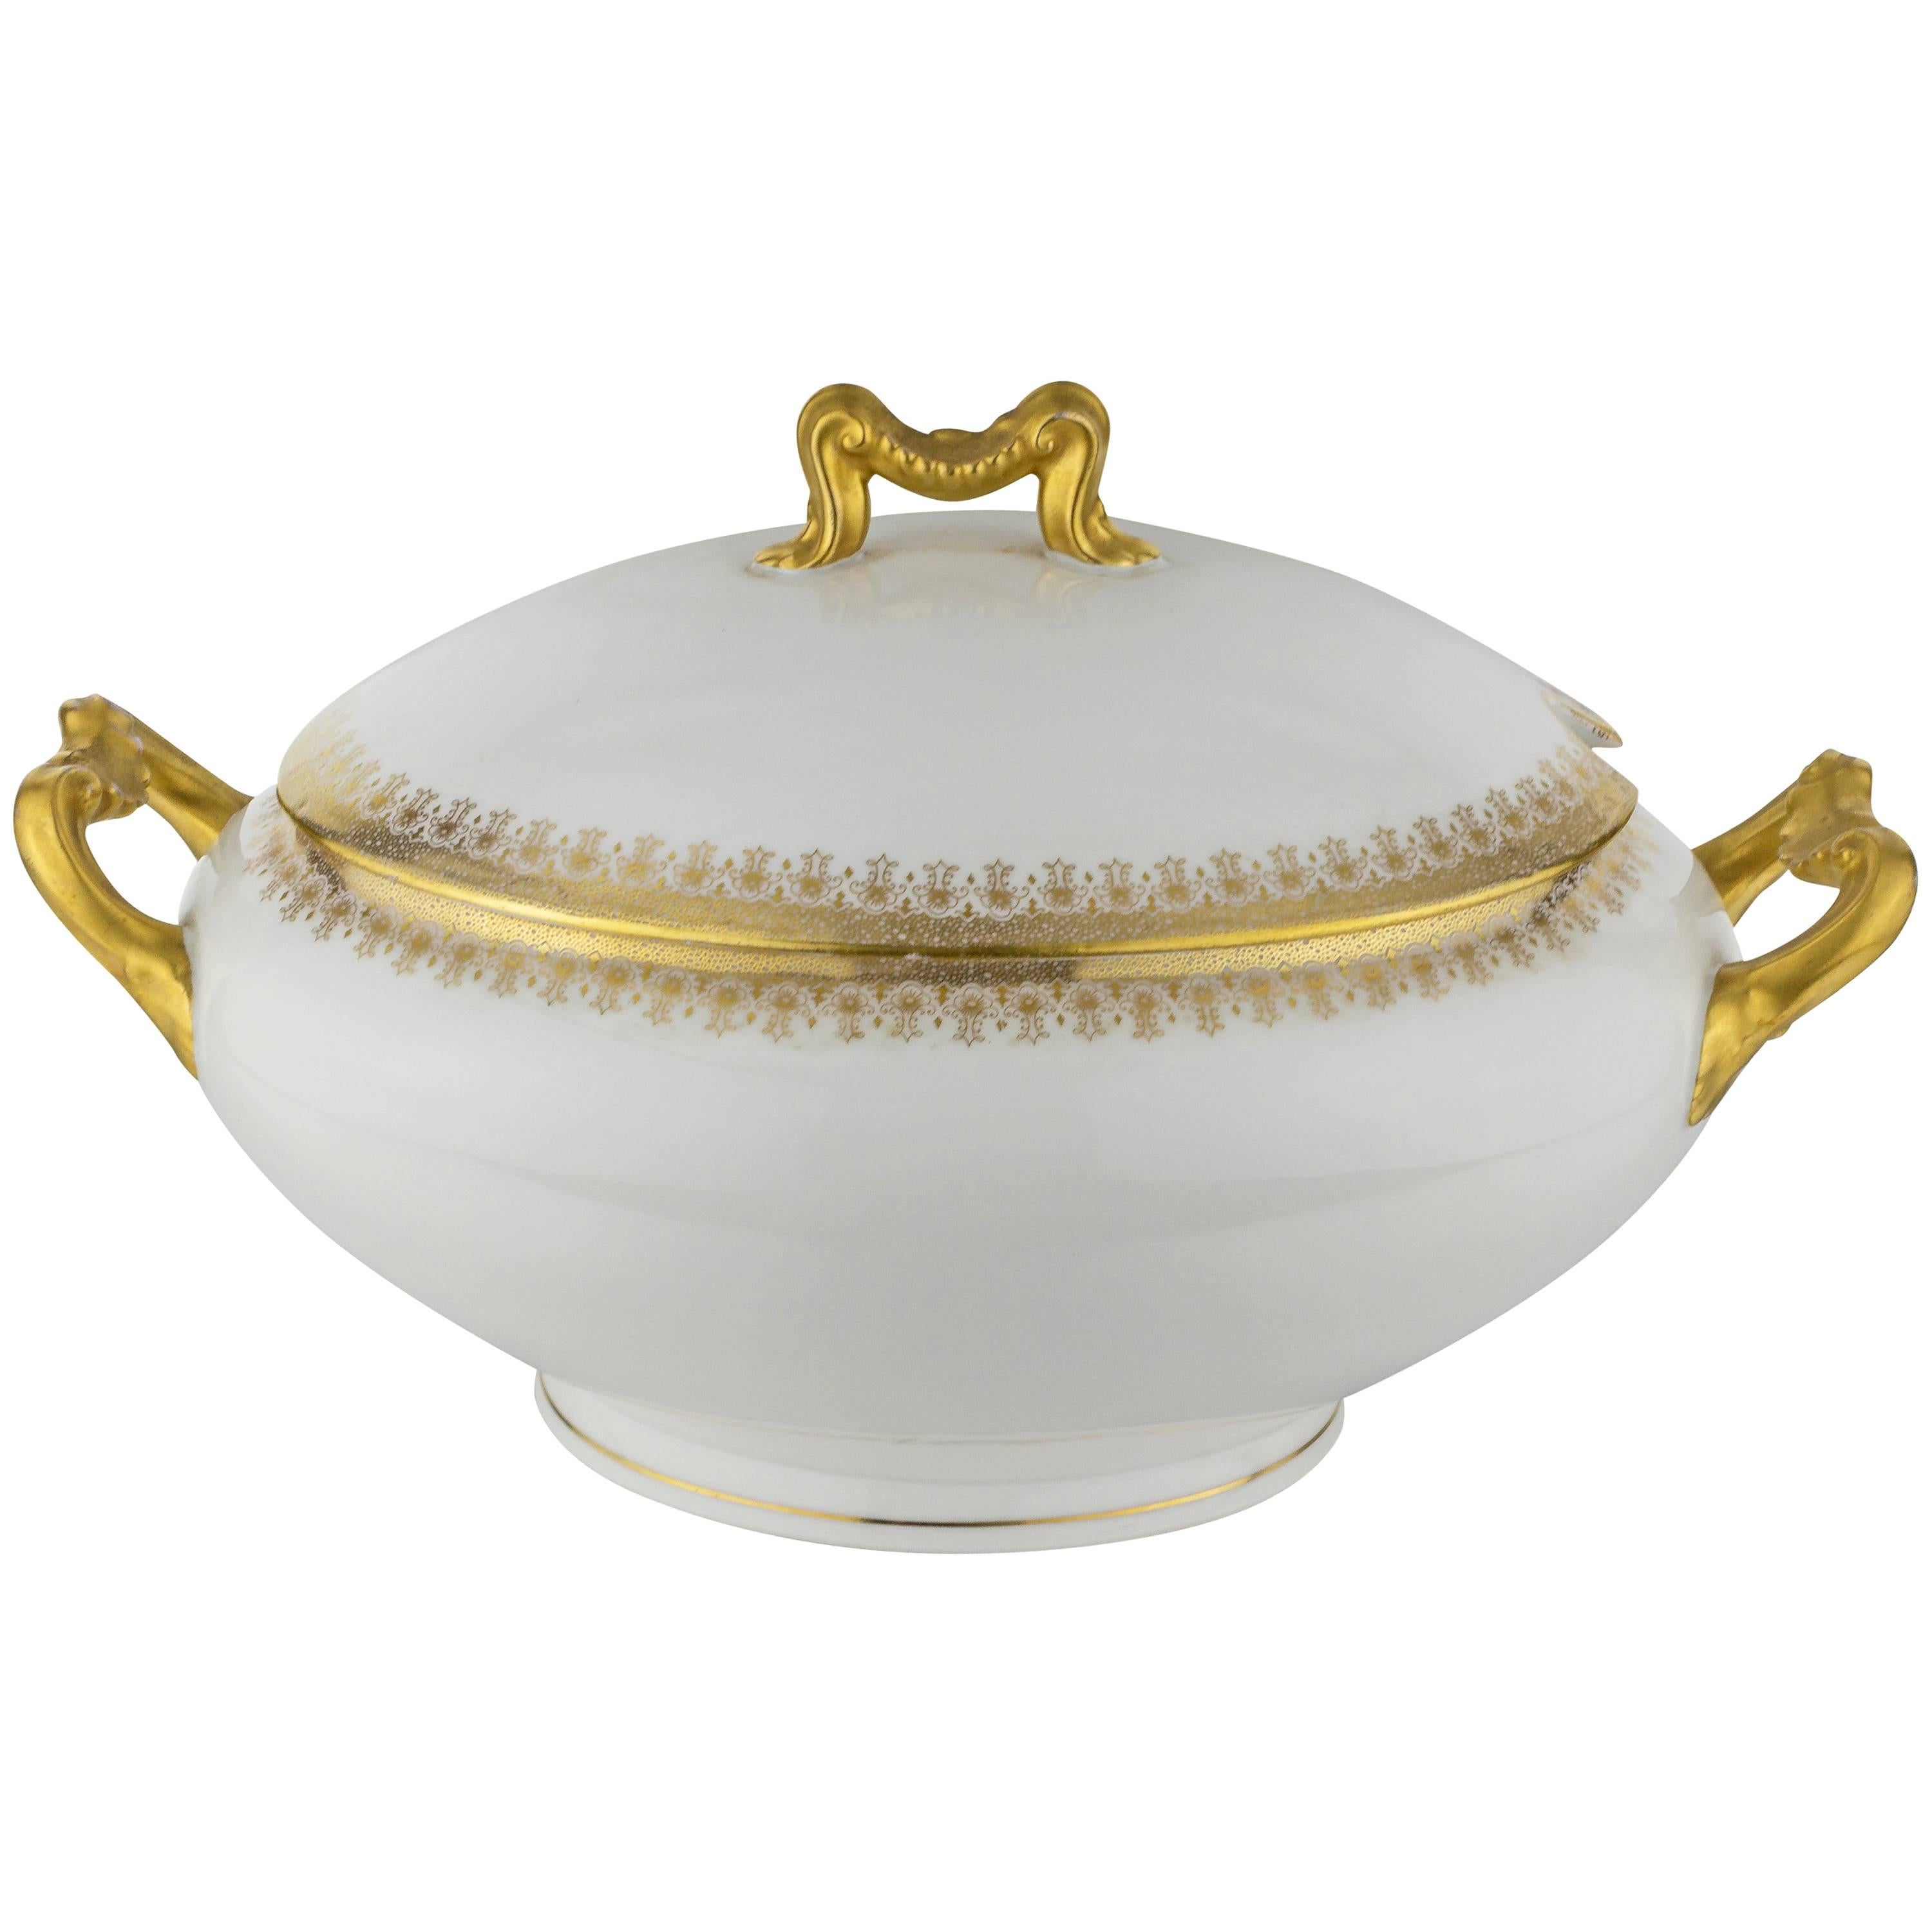 Limoges Covered Tureen